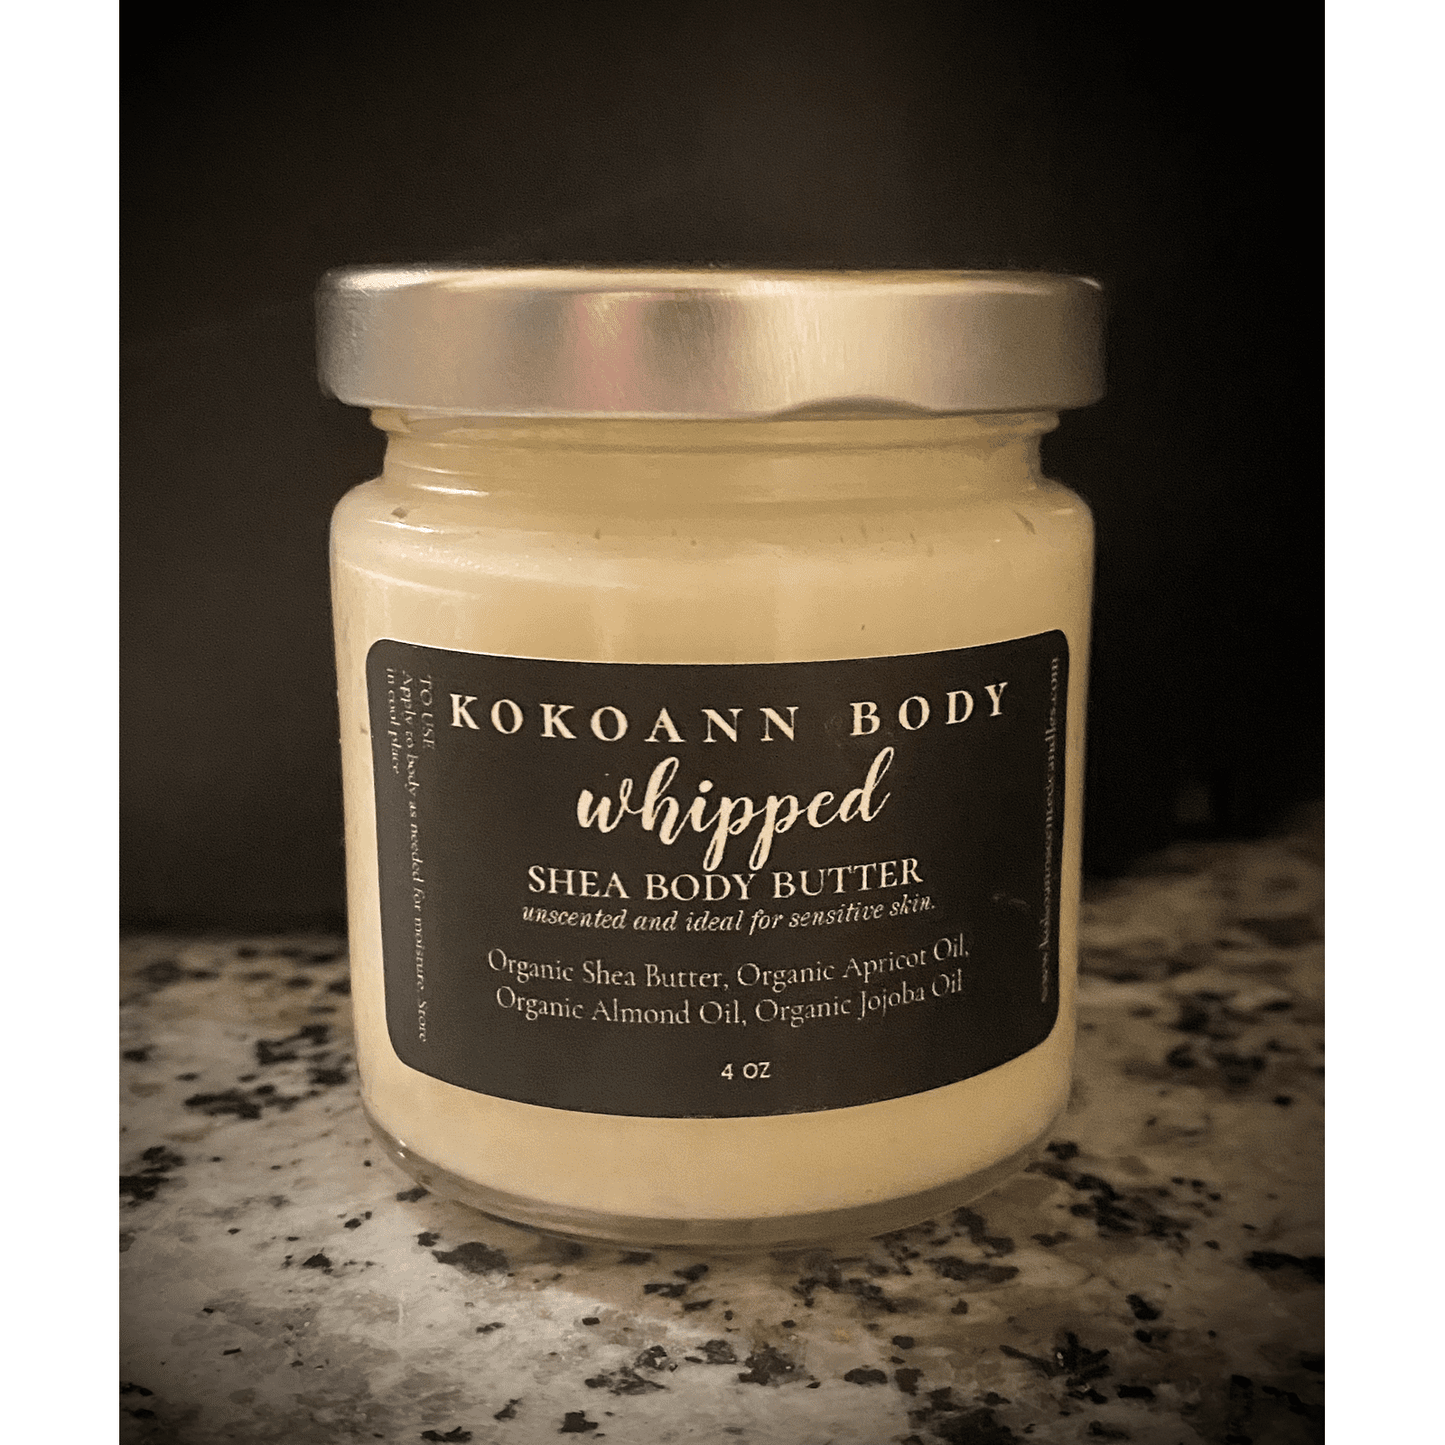 Unscented Whipped Shea Body Butter